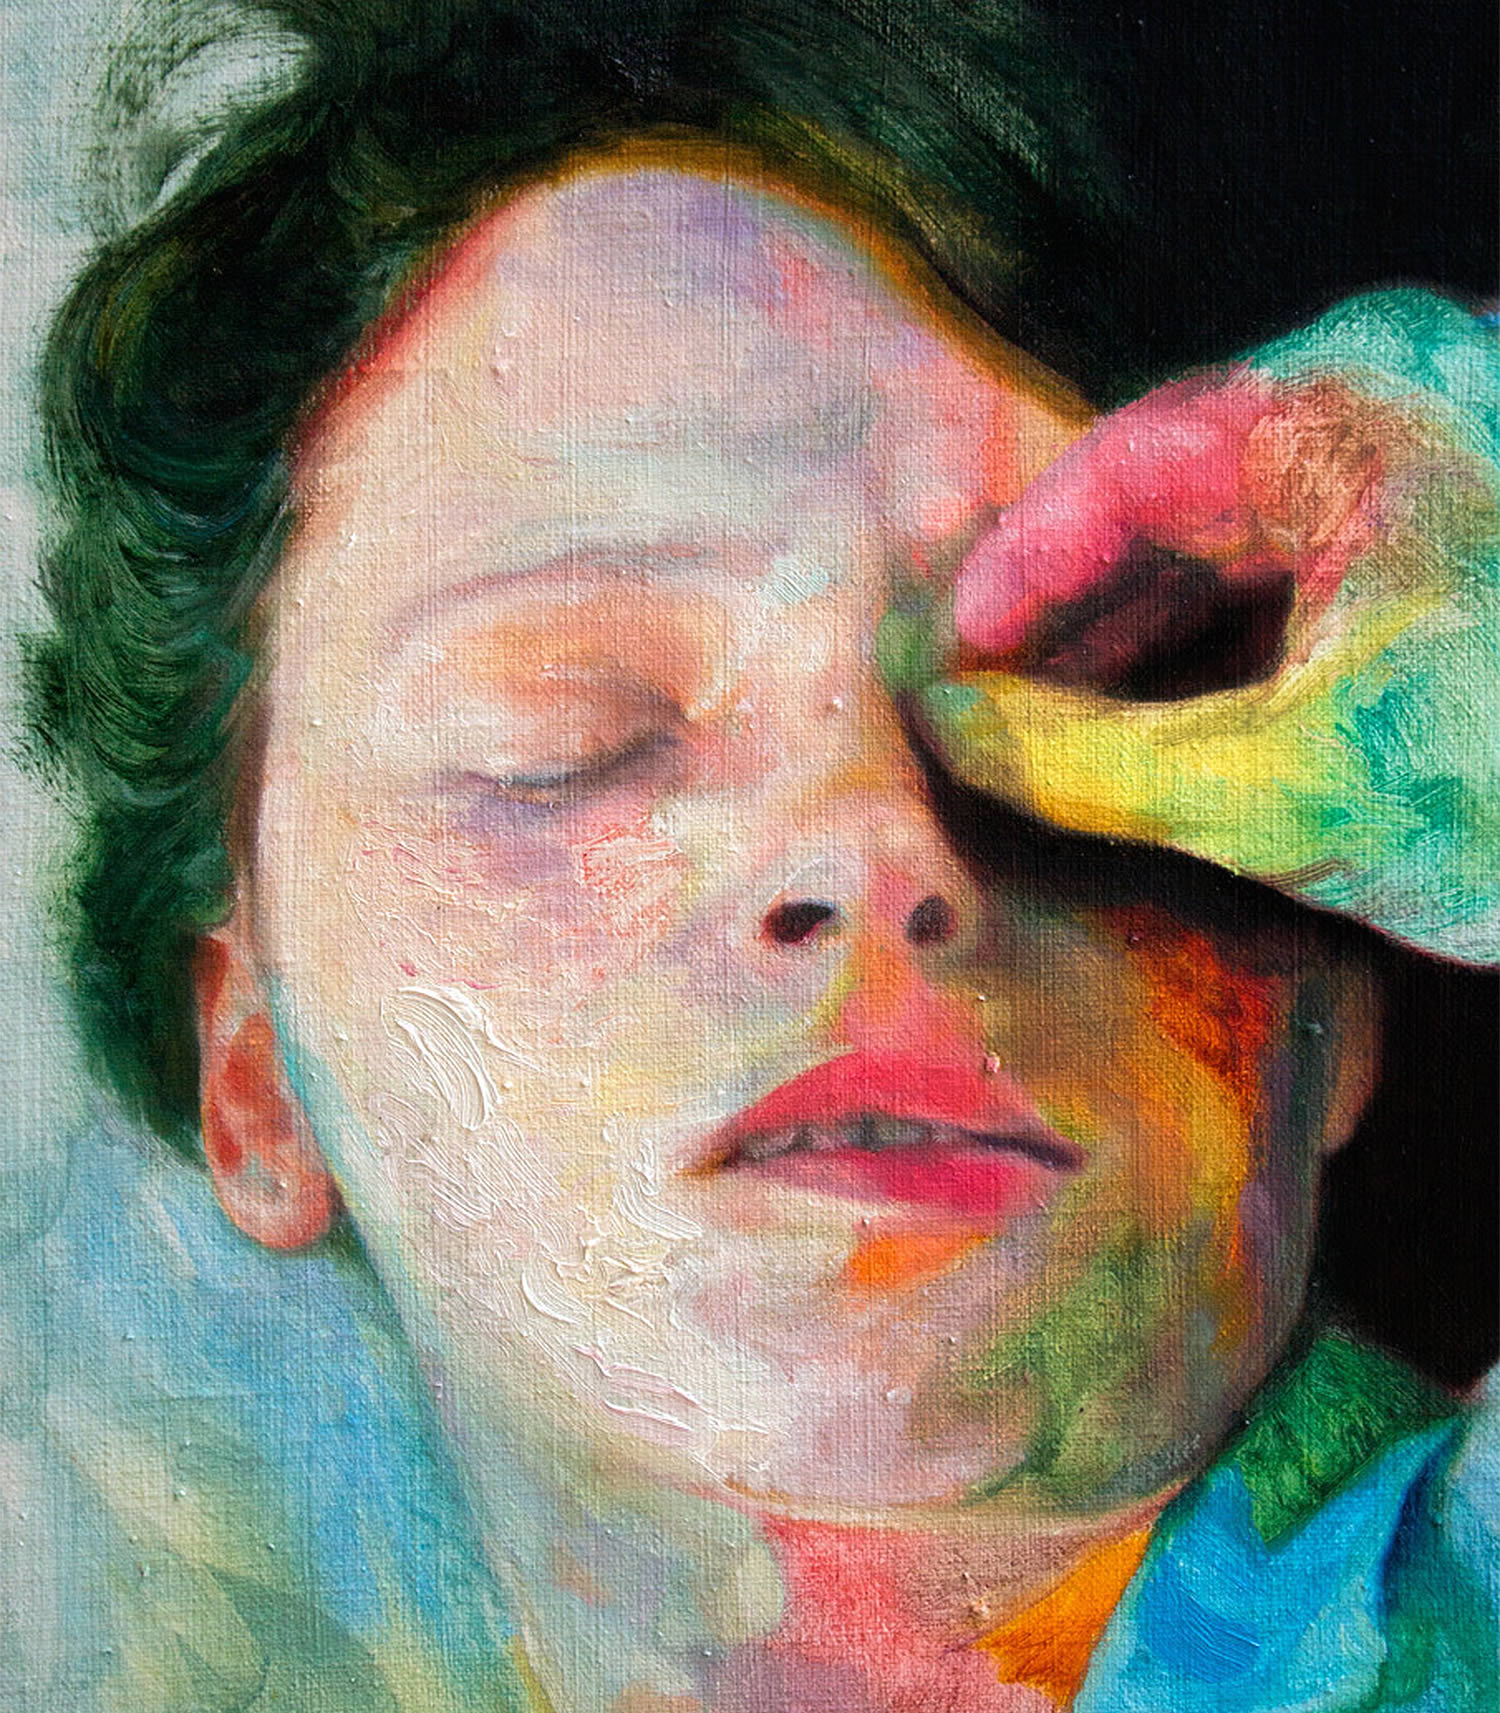 color painted hand over face, painting by Winston Chmielinski